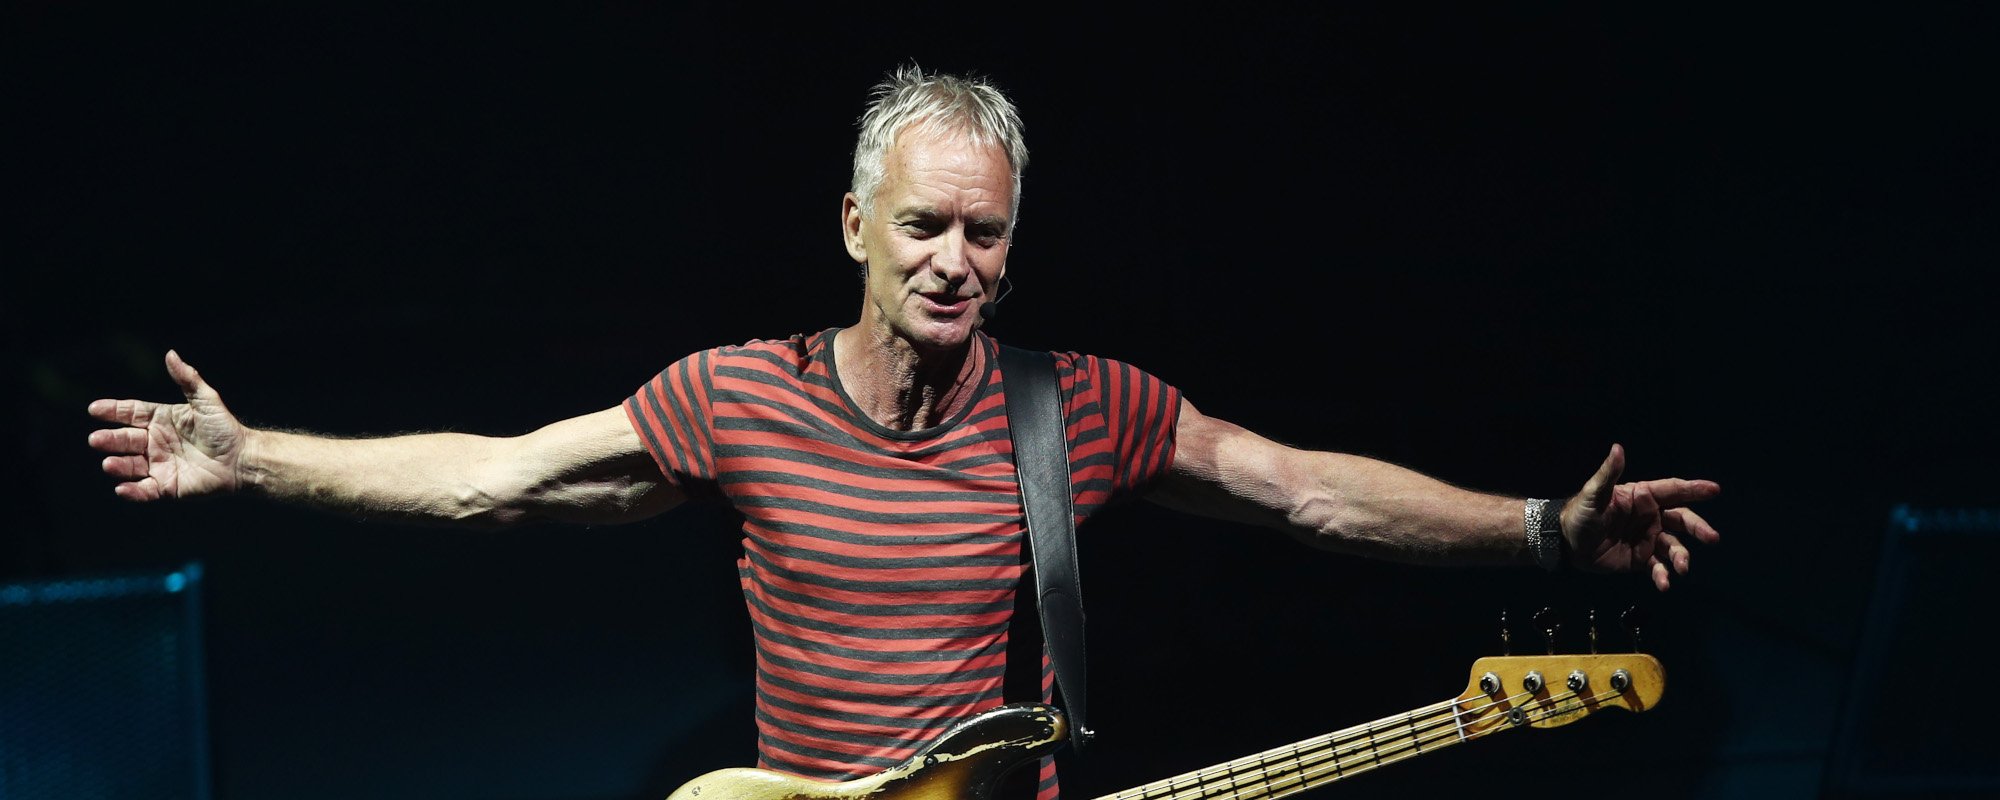 How Did Sting Get His Name?